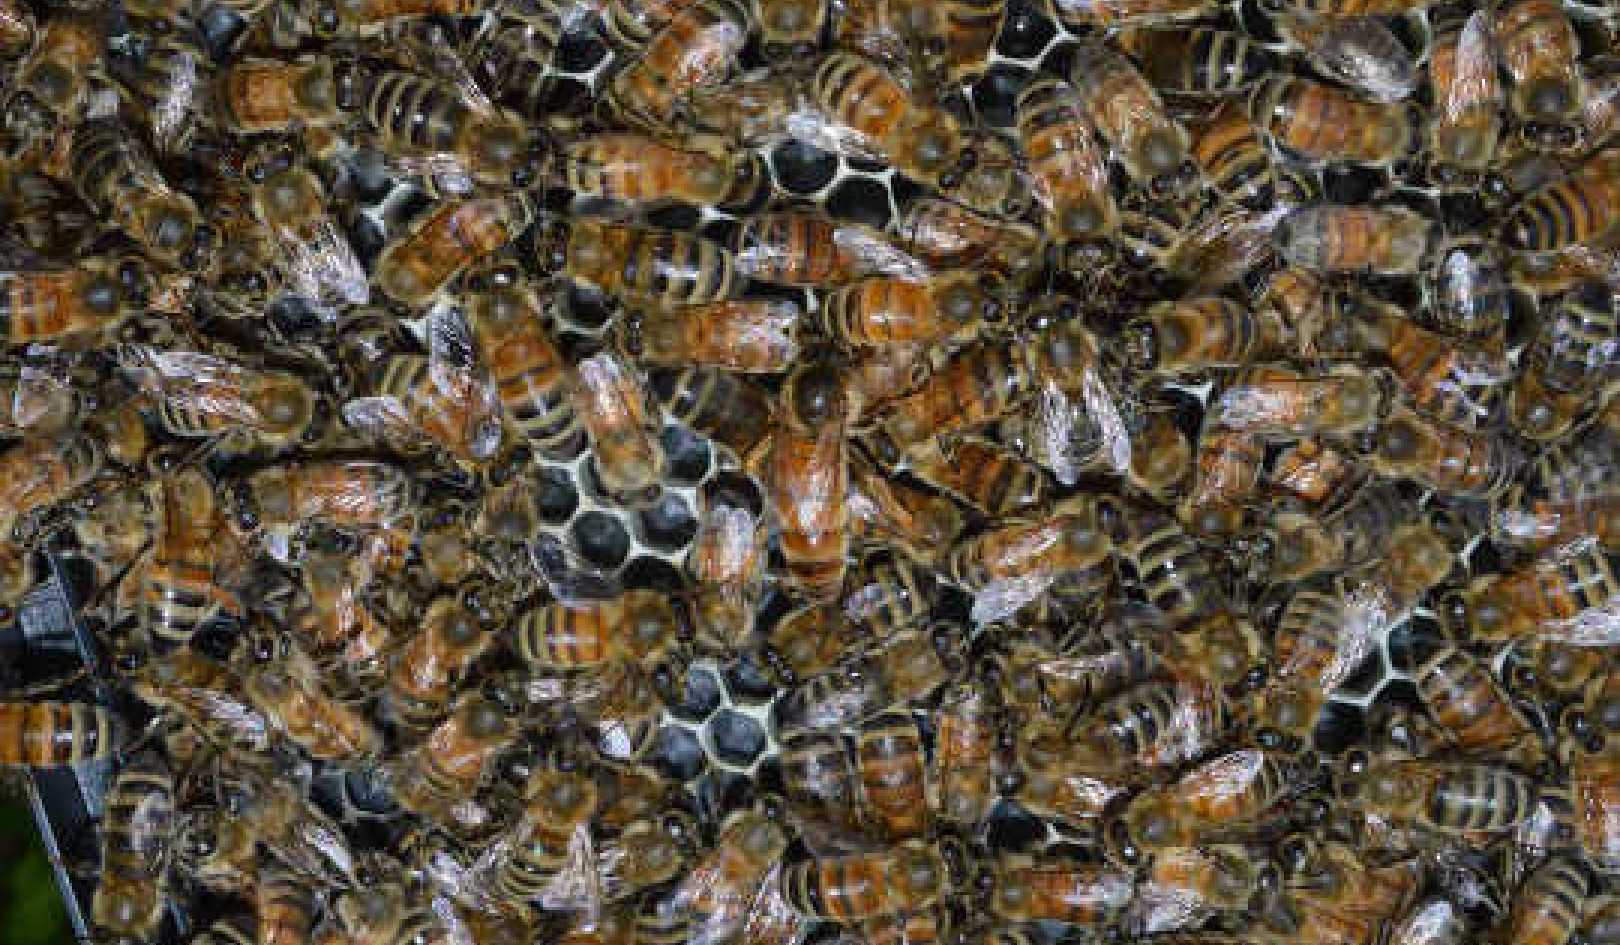 Honey Bees Stay Healthy In Such Close Quarters